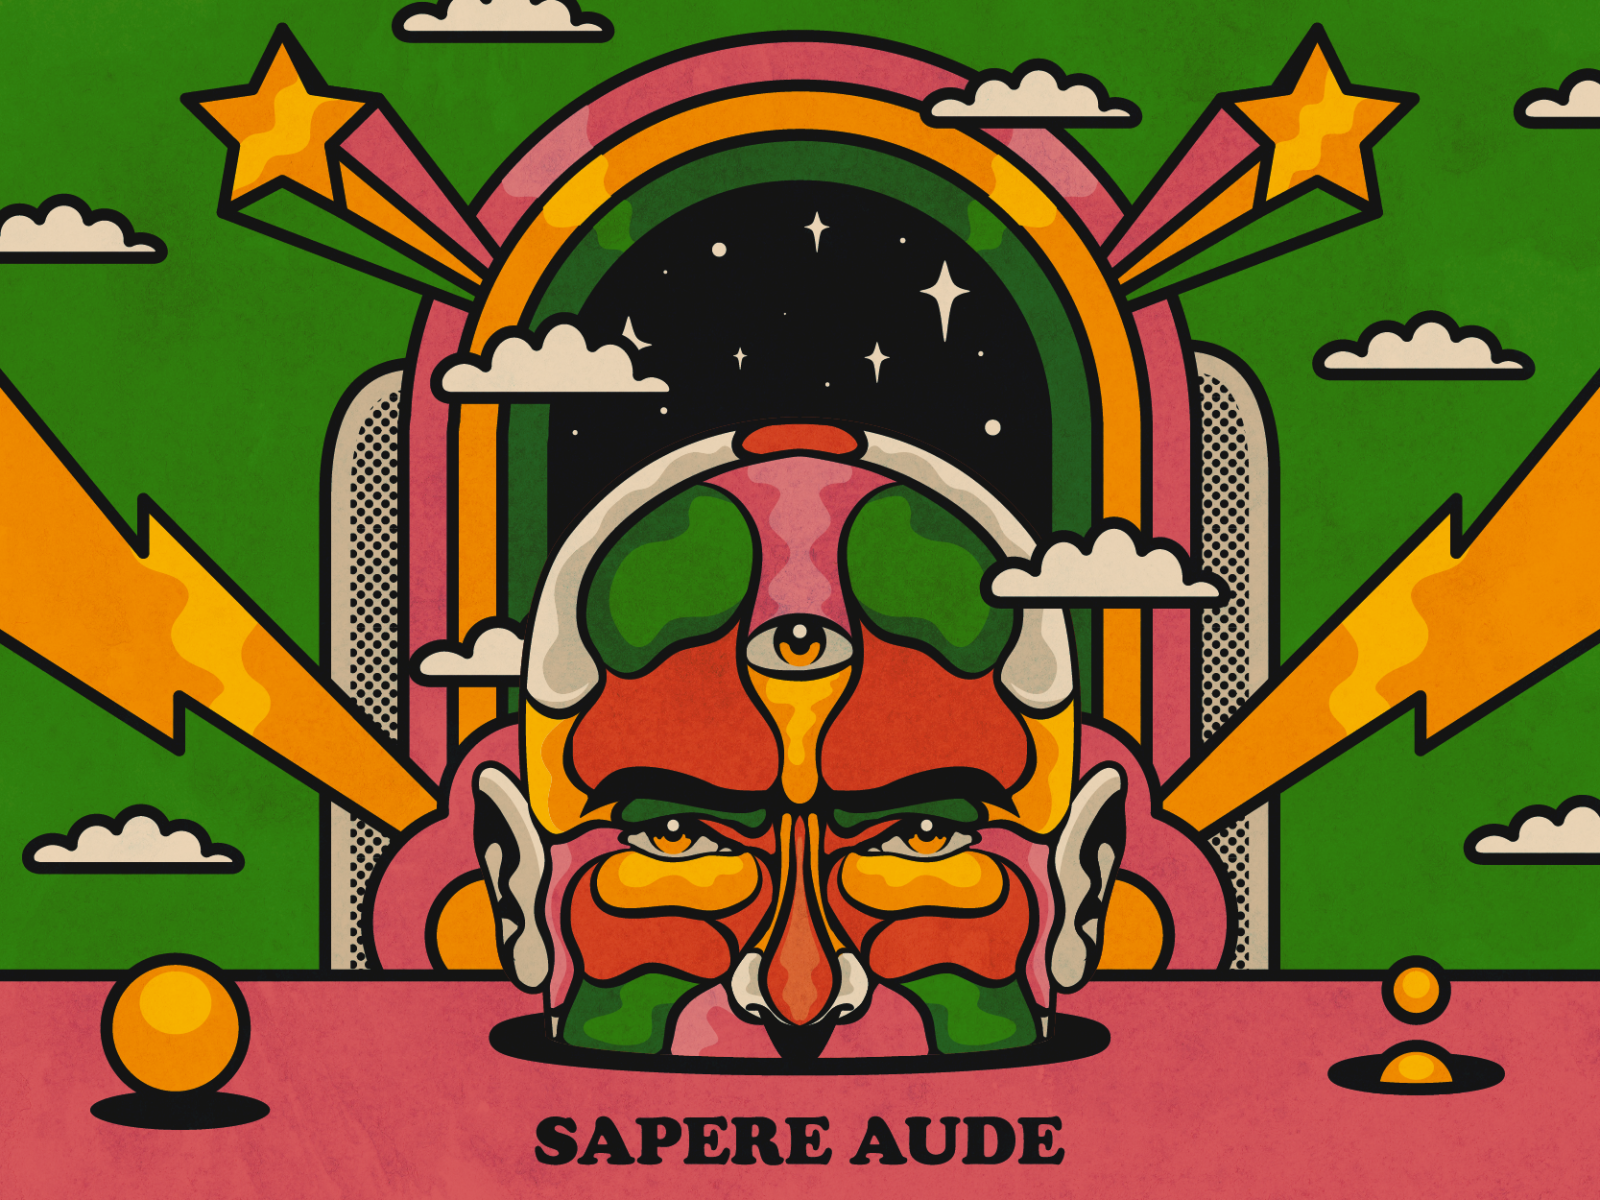 Sapere Aude by Roberlan Borges Paresqui on Dribbble